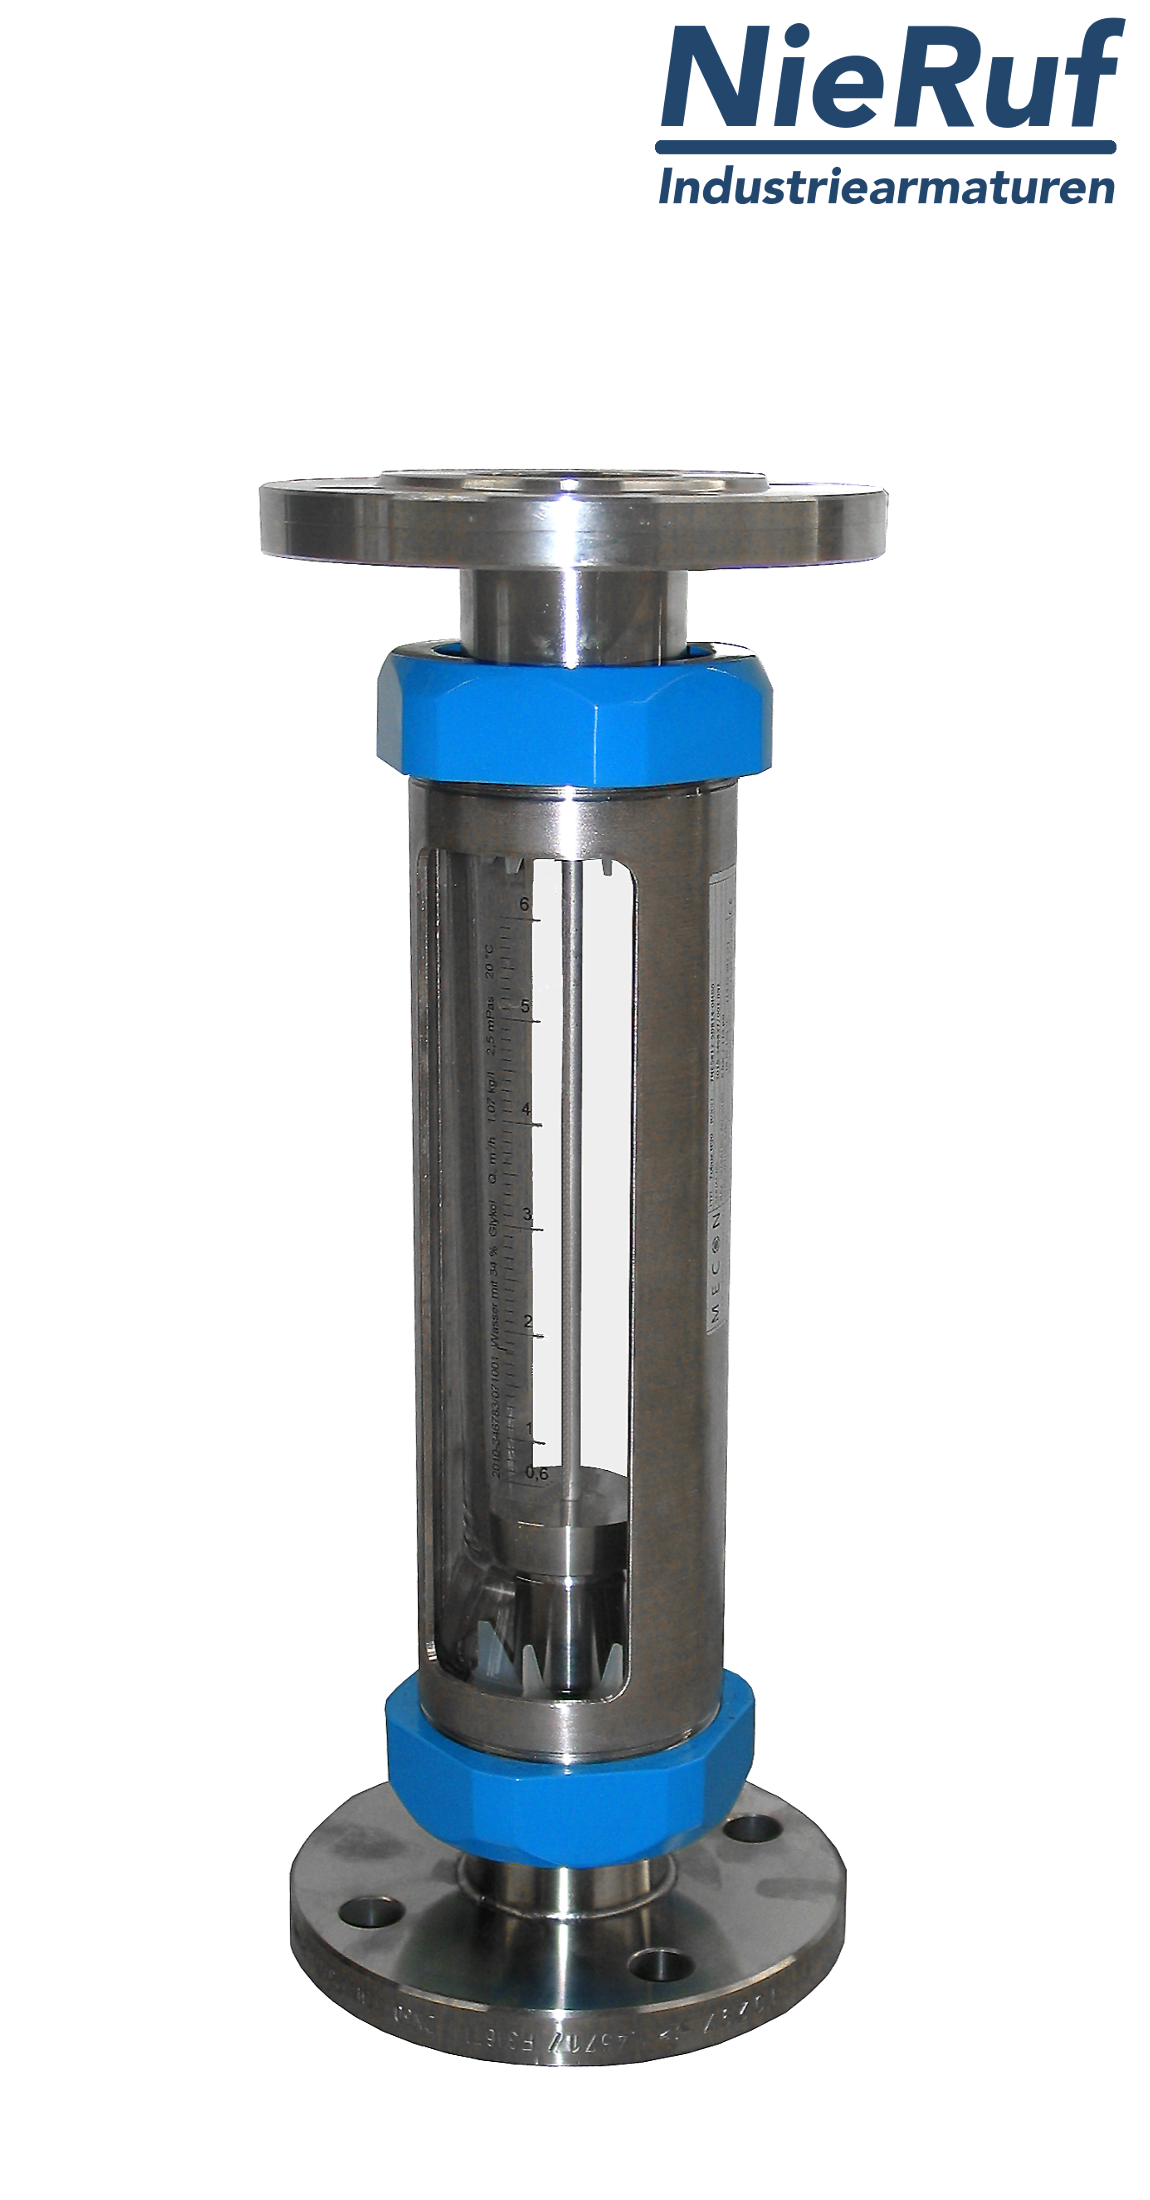 Variable area flowmeter stainless steel + borosilicate flange DN65 400.0 - 4000 l/h water FKM